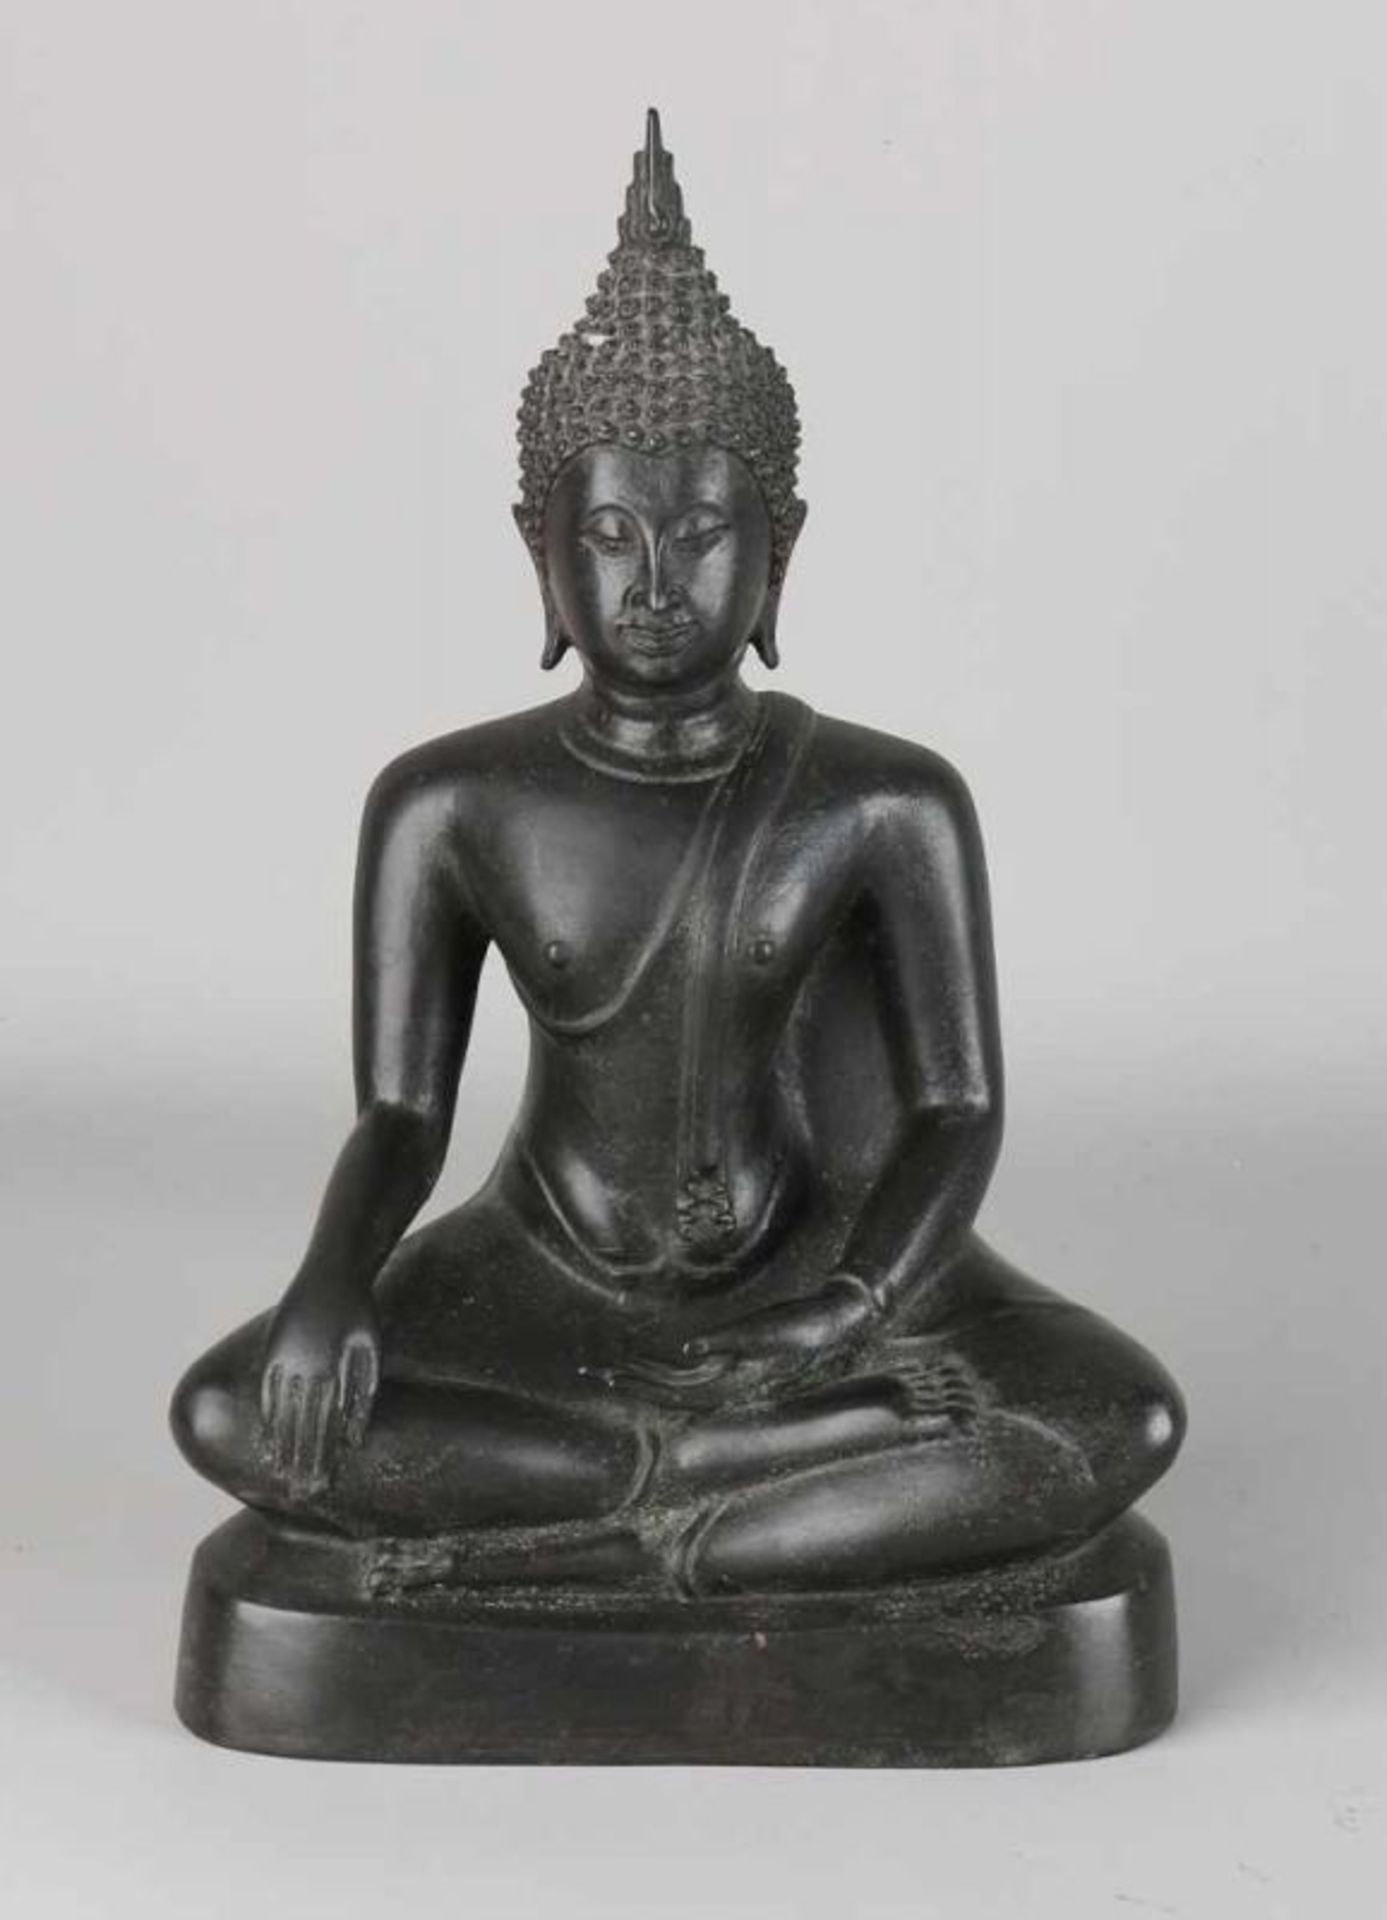 Old / antique Chinese bronze Buddha in lotus position. Size: H 27 cm. In good condition.